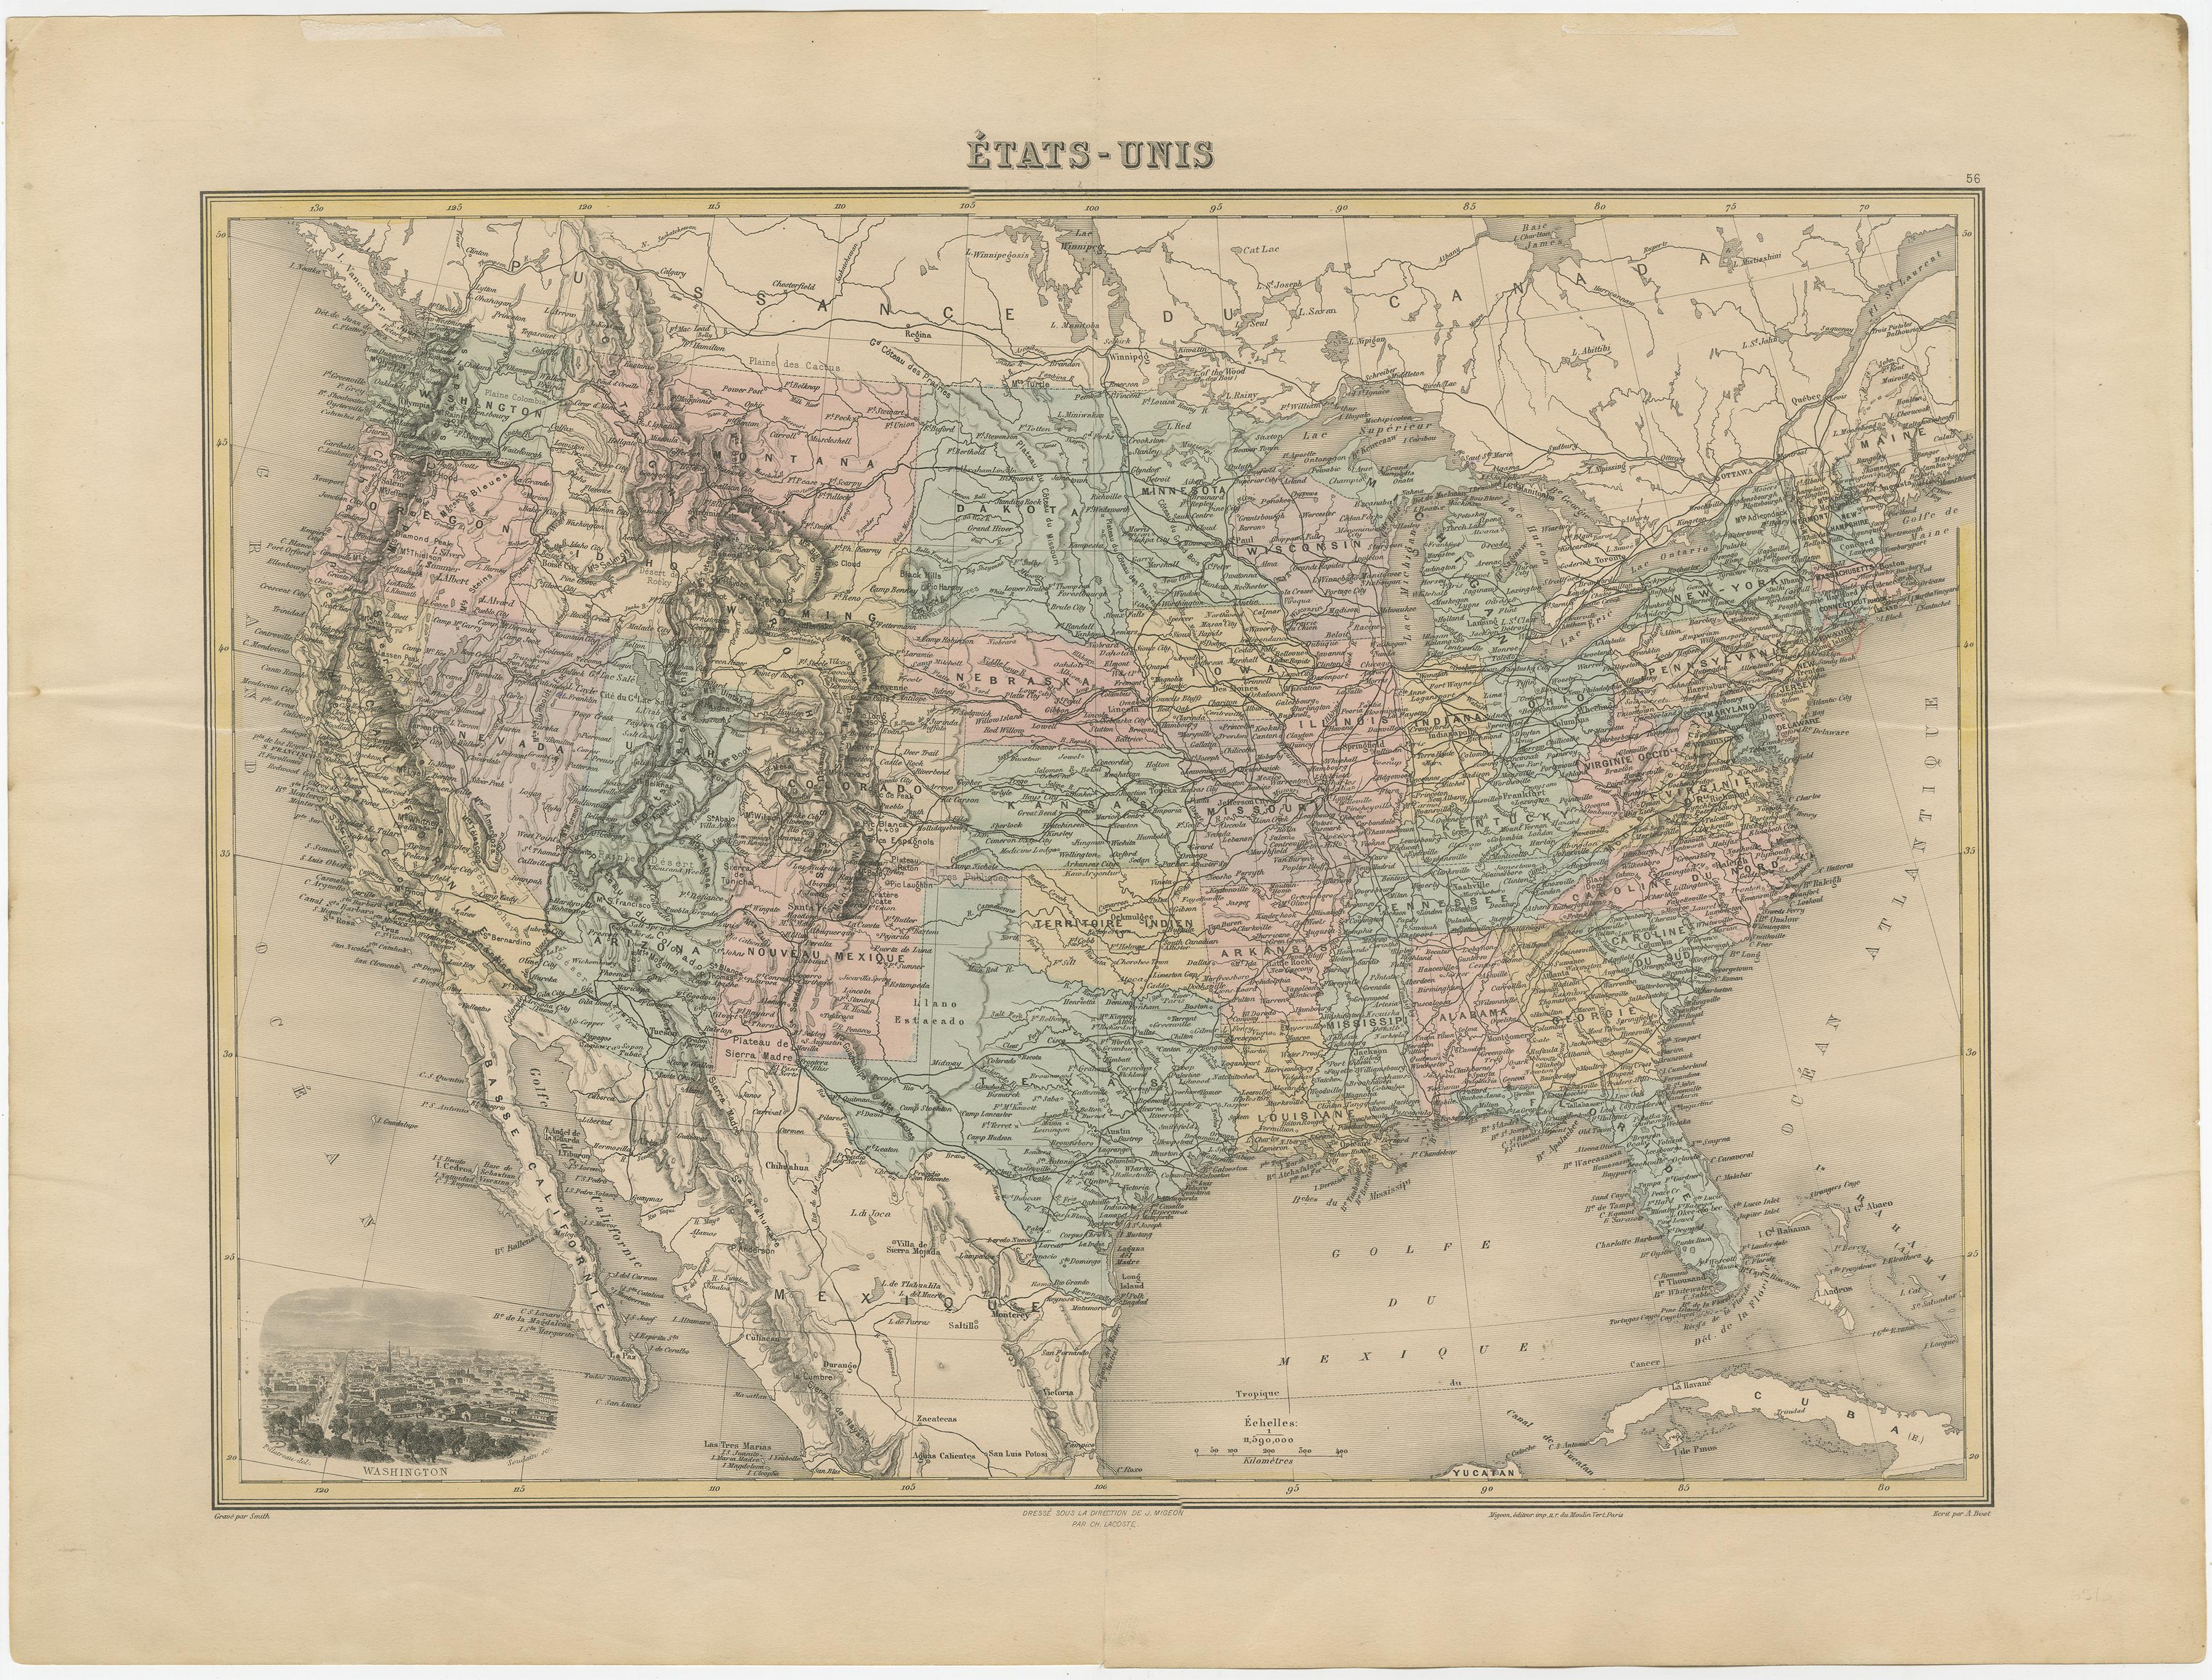 Antique map titled 'États-Unis'. A very attractive and detailed late 19th century map of the United States, with a fine decorative vignette of Washington. The extensive railway network which had been established in United States by that time is